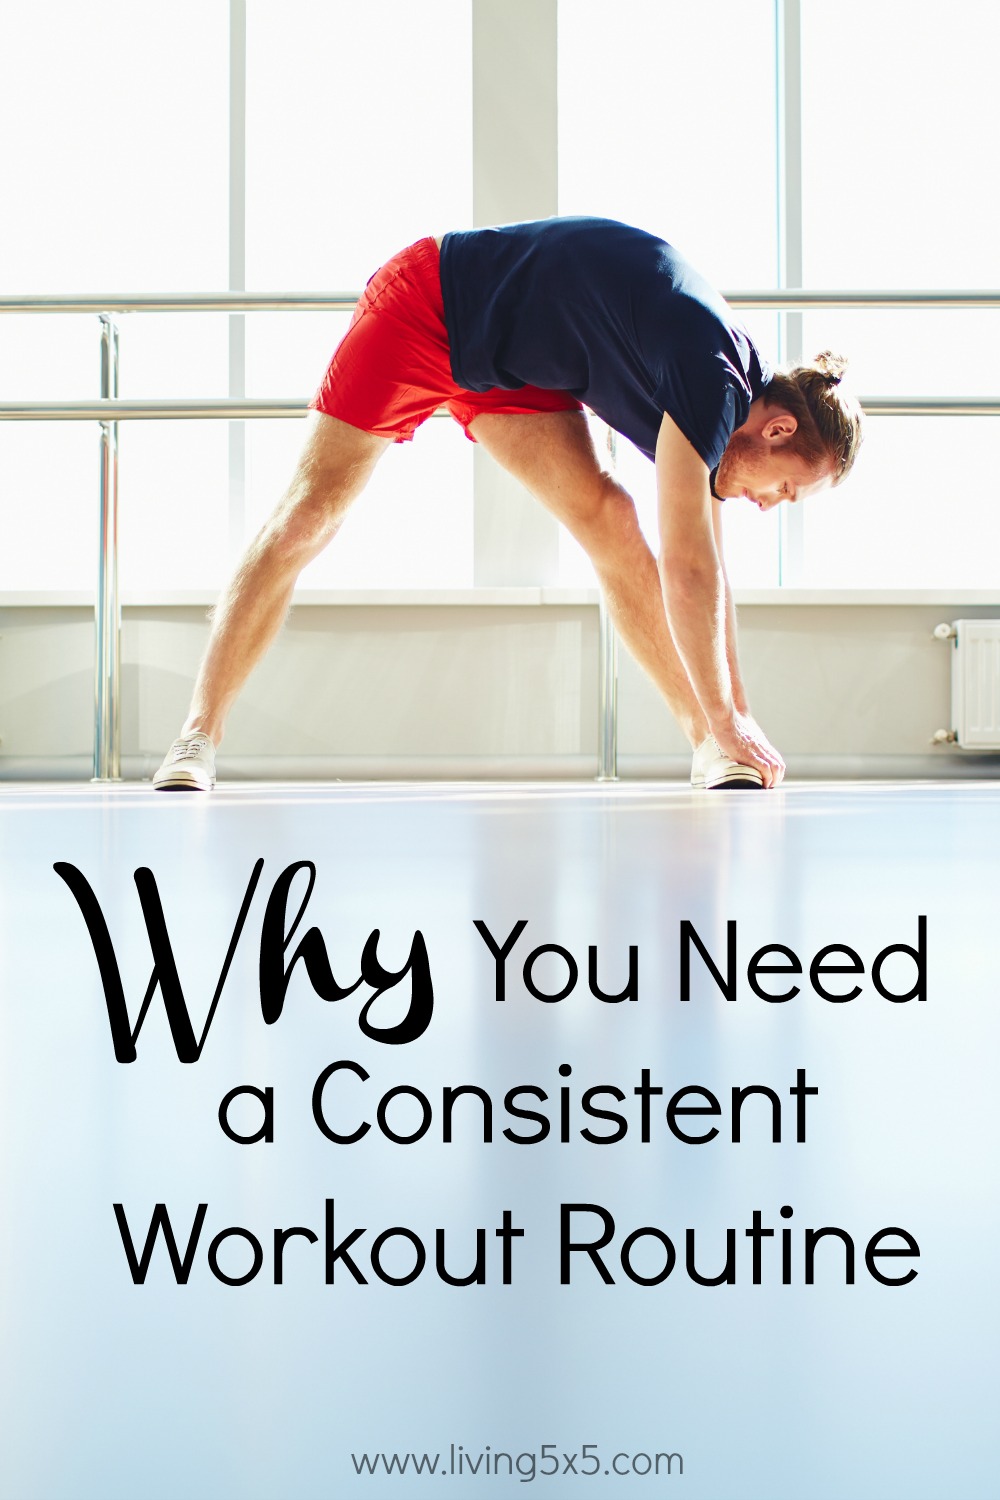 Learn Why You Need a Consistent Workout Routine, and how it can tremendously change you!